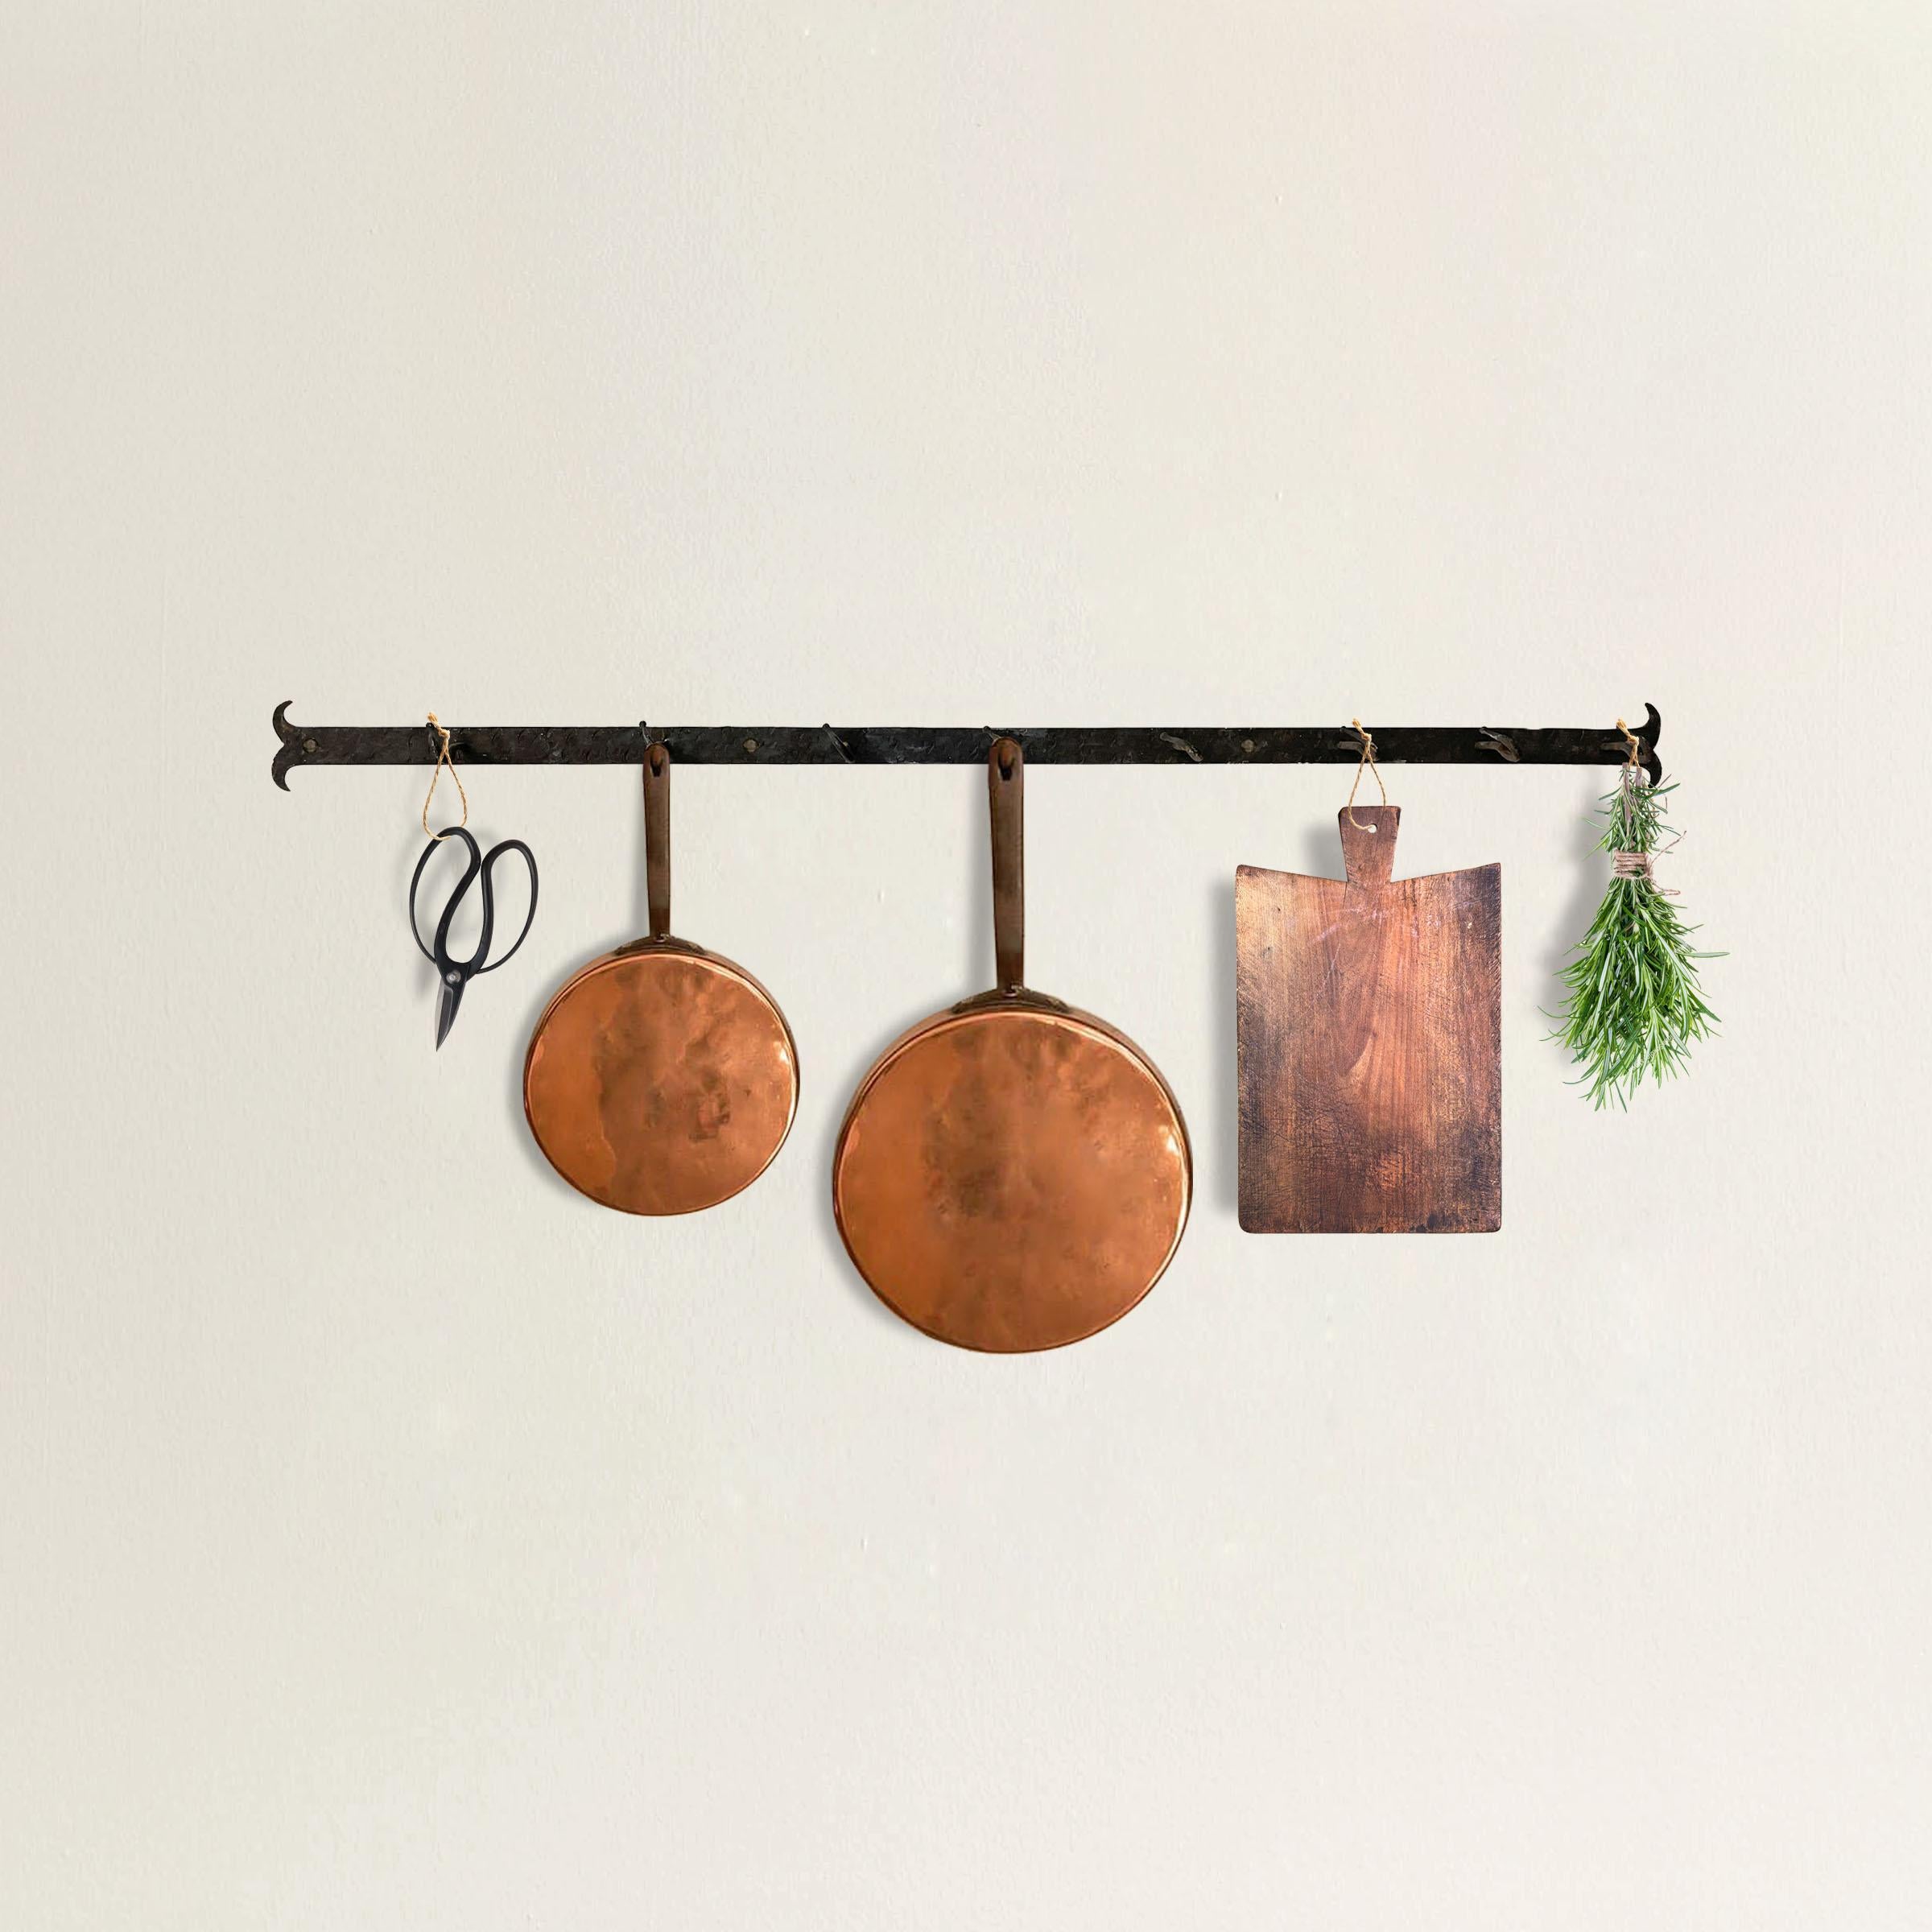 A simple yet refined early 20th century French wrought-iron wall-mounted pot rack with eight hooks. Perfect for hanging on the wall above your stove to keep pots, lids, cutting boards, or any myriad things at your finger tips in the kitchen.